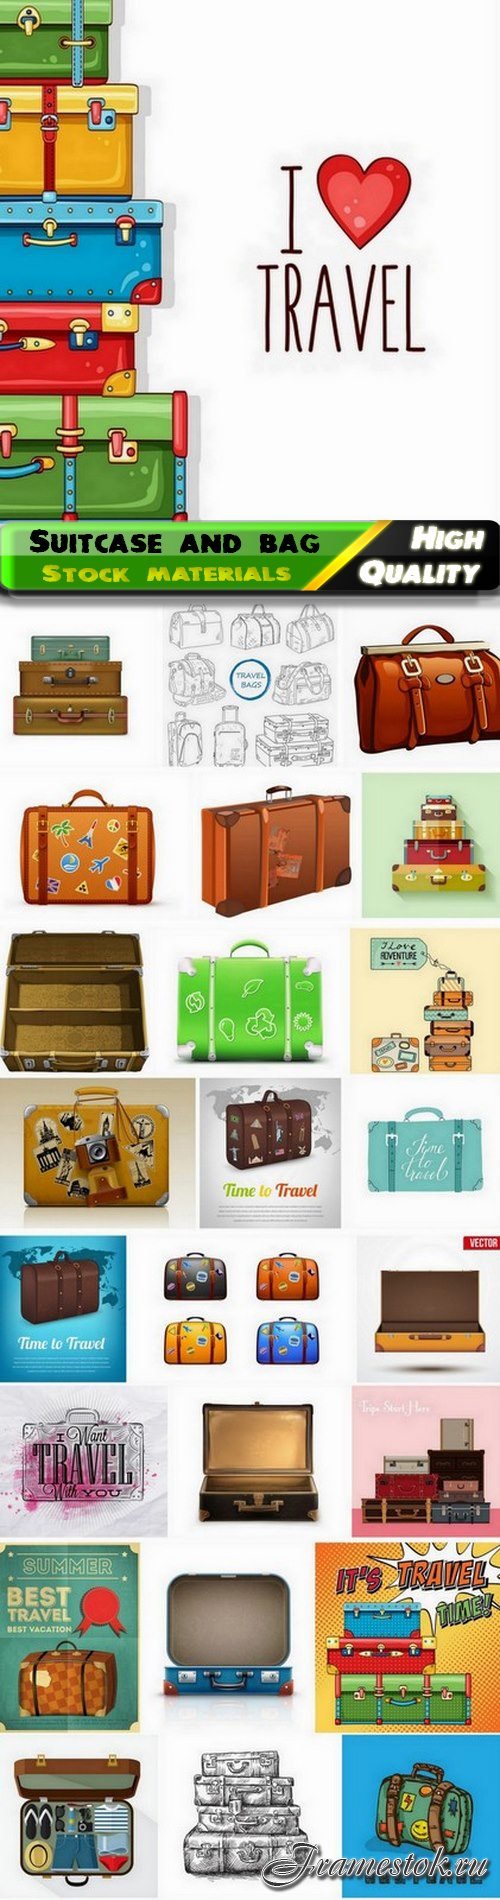 Old retro vintage suitcase and travel bag for holiday vacation 25 Eps